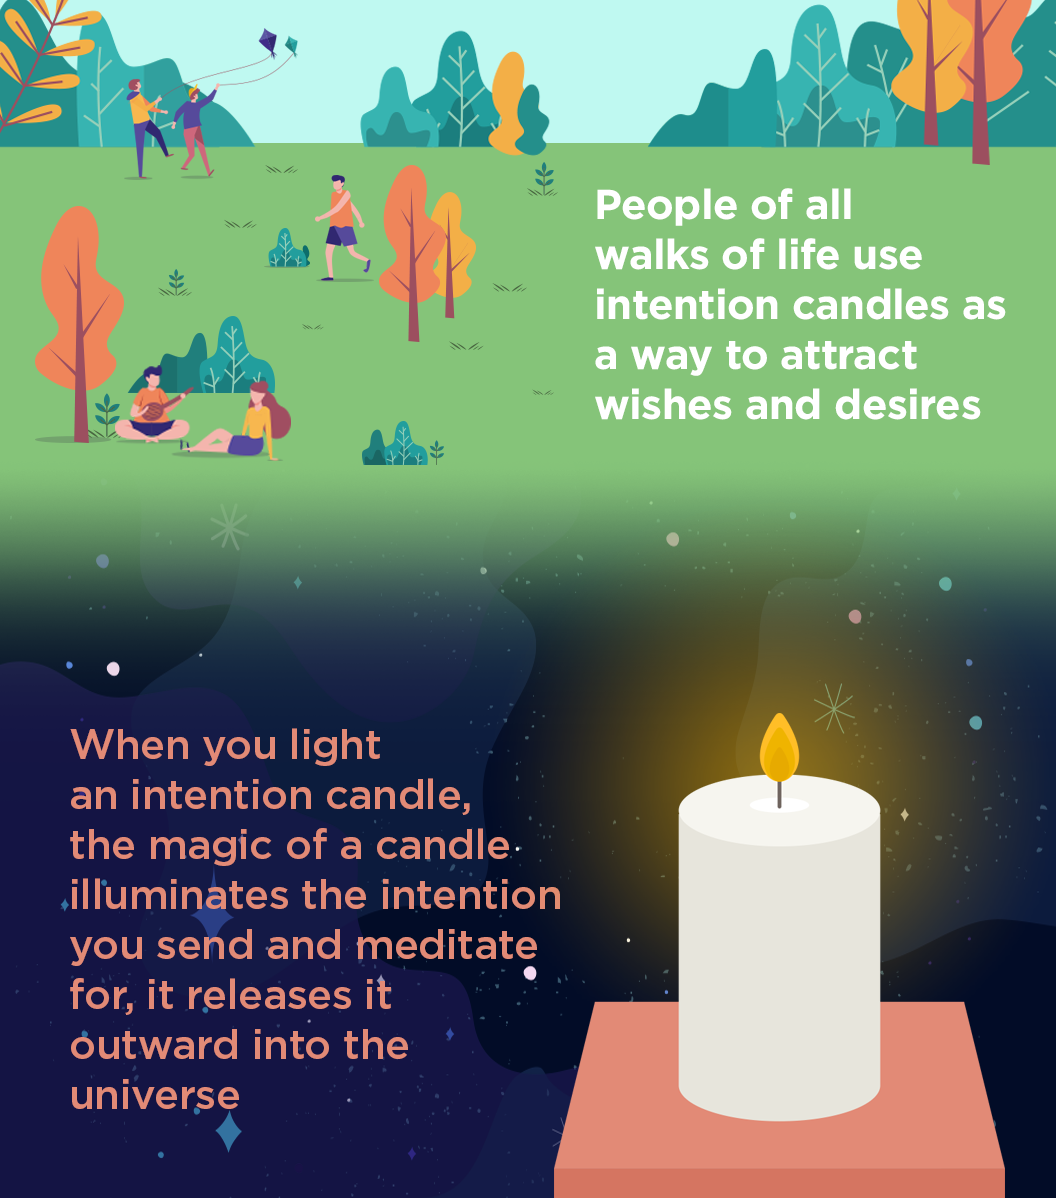 What's Healing About Lighting Candles?